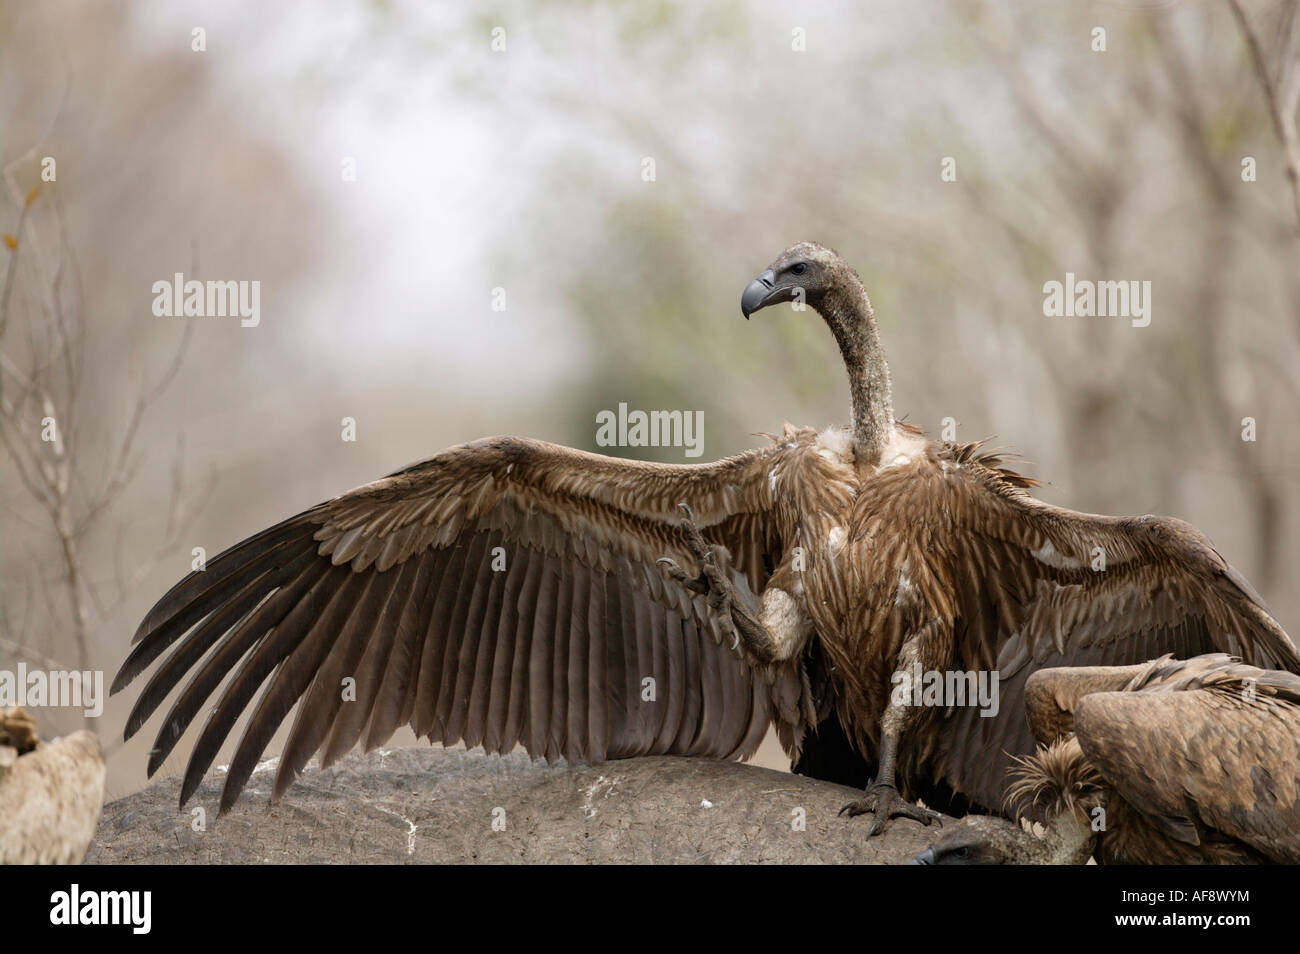 Whitebacked  vulture dominance display walking aggressively towards another with its wings outstretched and foot raised Stock Photo